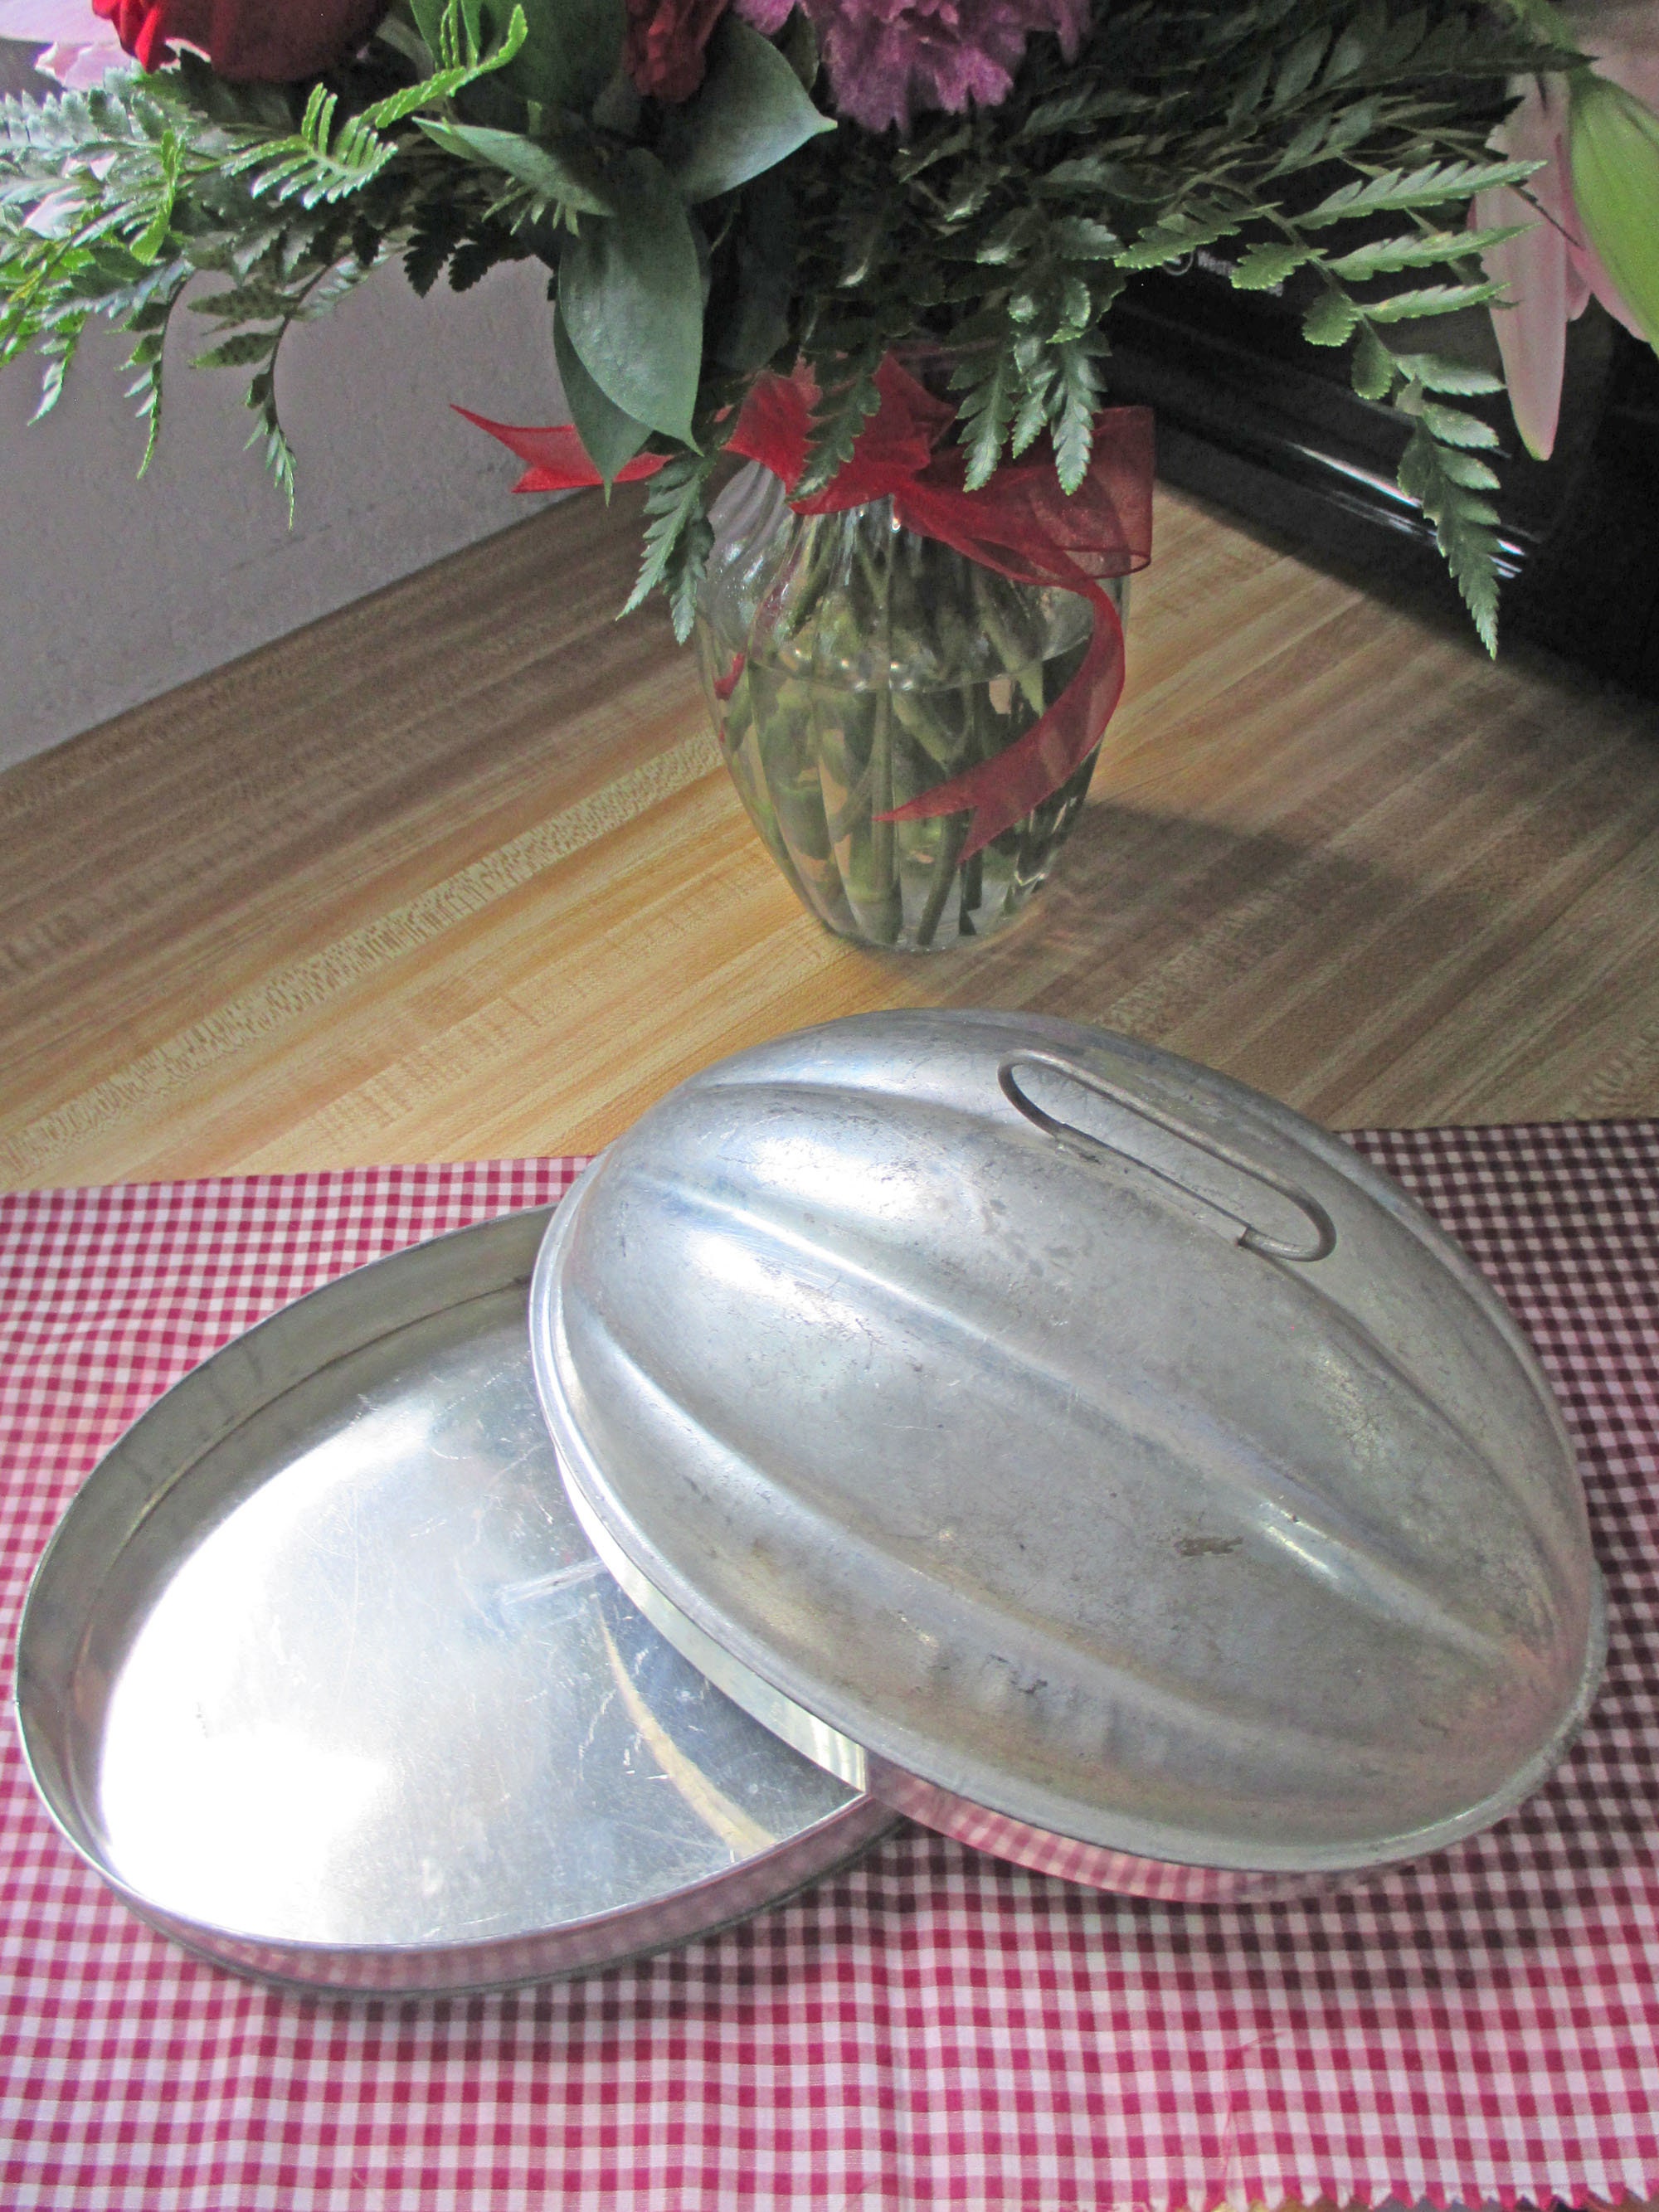 Antique, Melon Primitive Tin 2 Piece English Pudding Mold-Great Patina - Wall Hanger-Baking, Ice Cream, Jello, Aspic, Many Uses-Estate Find